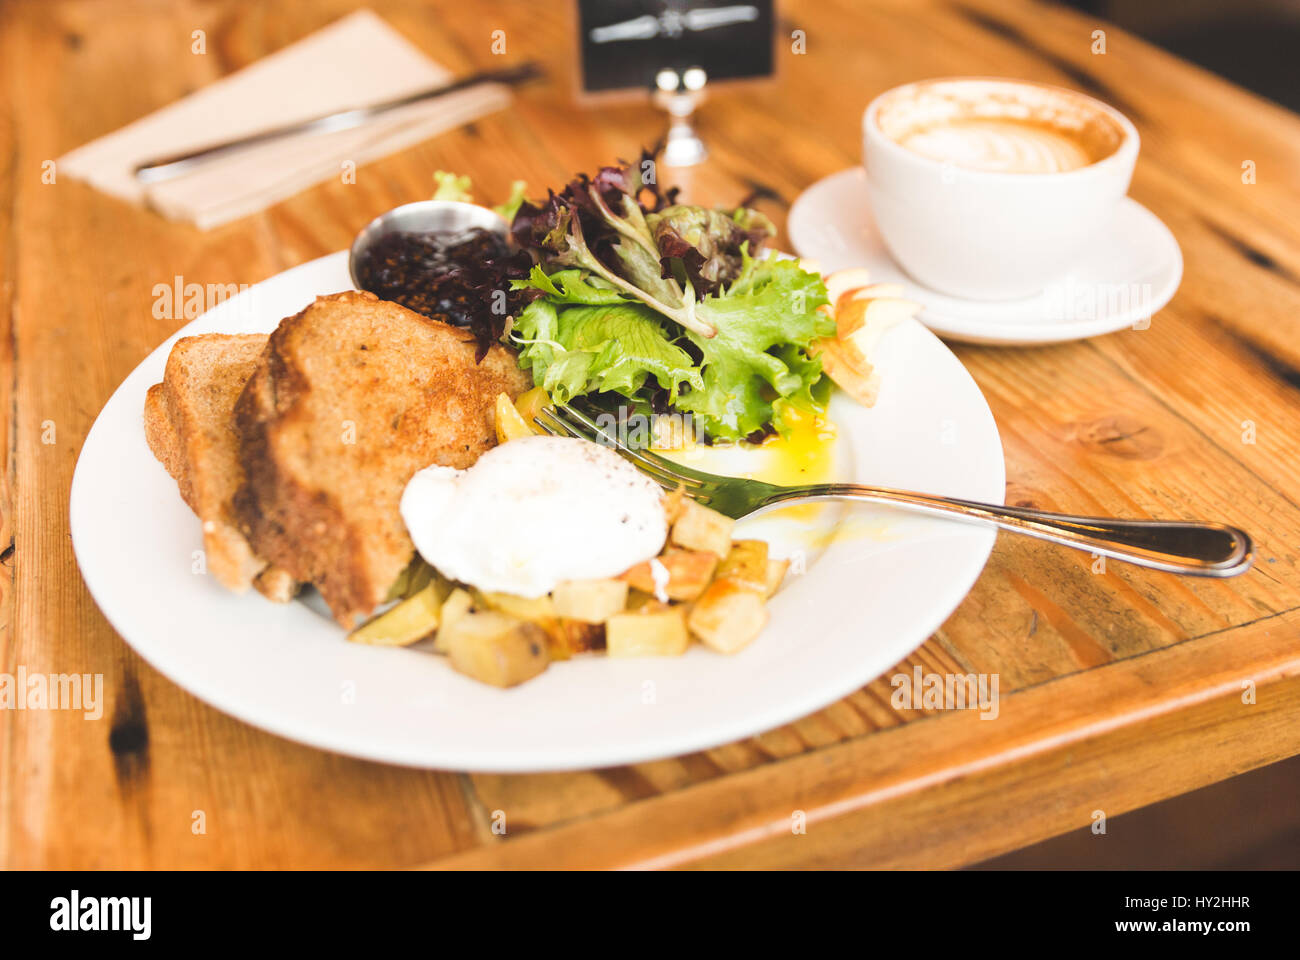 Eggs, potatoes, lettuce, toast and coffee in a breakfast meal spread. Upscale cafe setting. Stock Photo